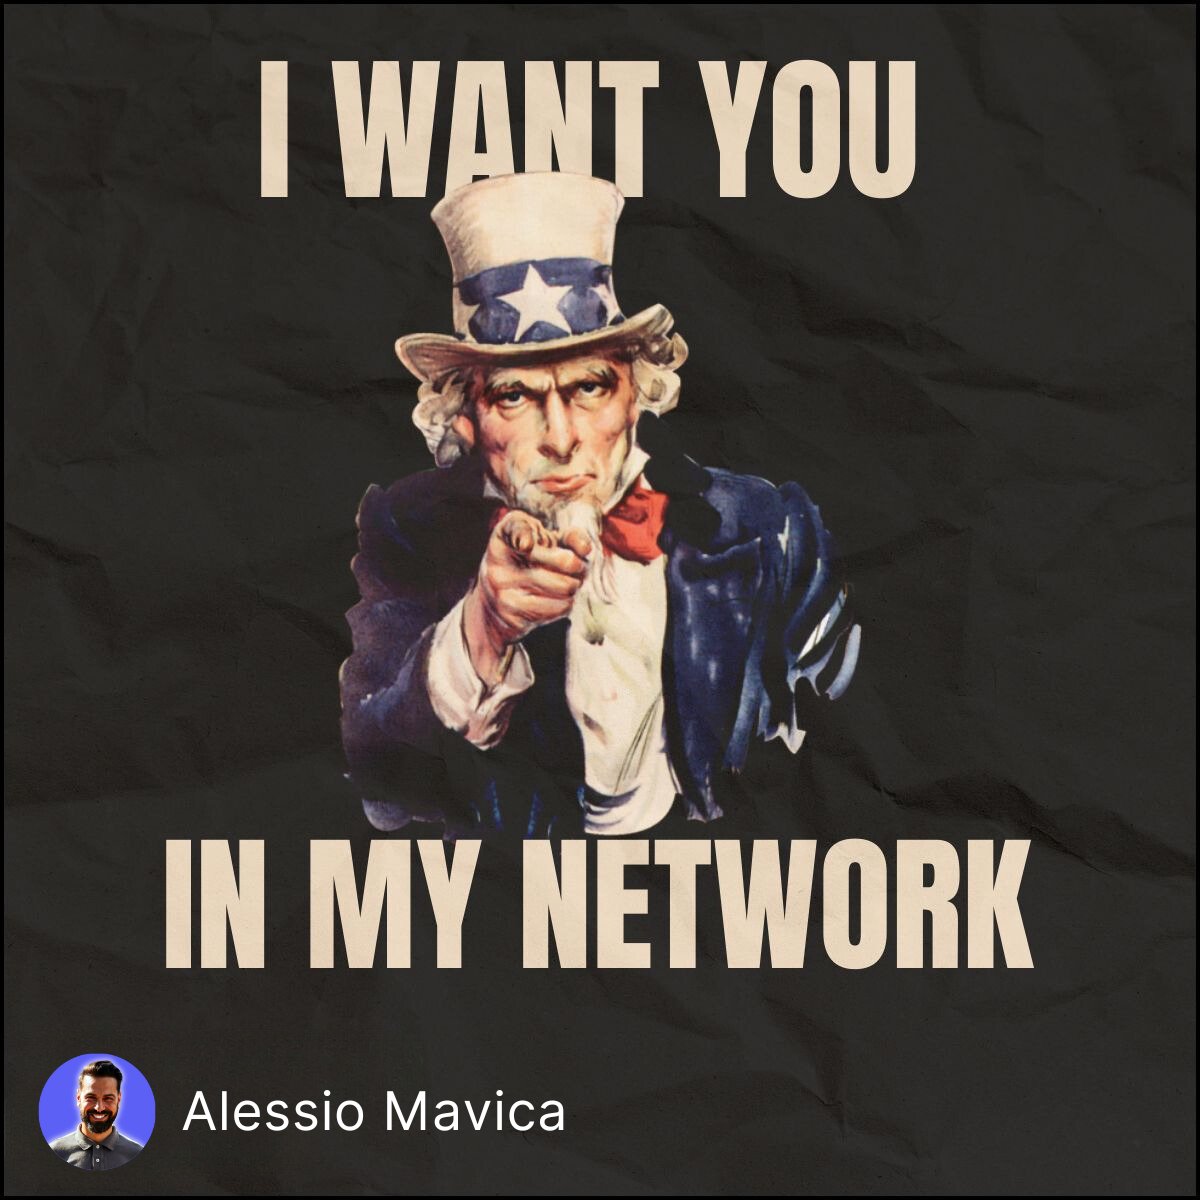 My goal for #SocialSaturday is to make 500 new connections🎯

Let's get the party started!

✔Repost it
✔Like this post
✔Connect  (I'll follow back all today)
✔Give us an introduction
✔Write what you're looking for at this party

#letsconnect #buildinpublic #indiehackers